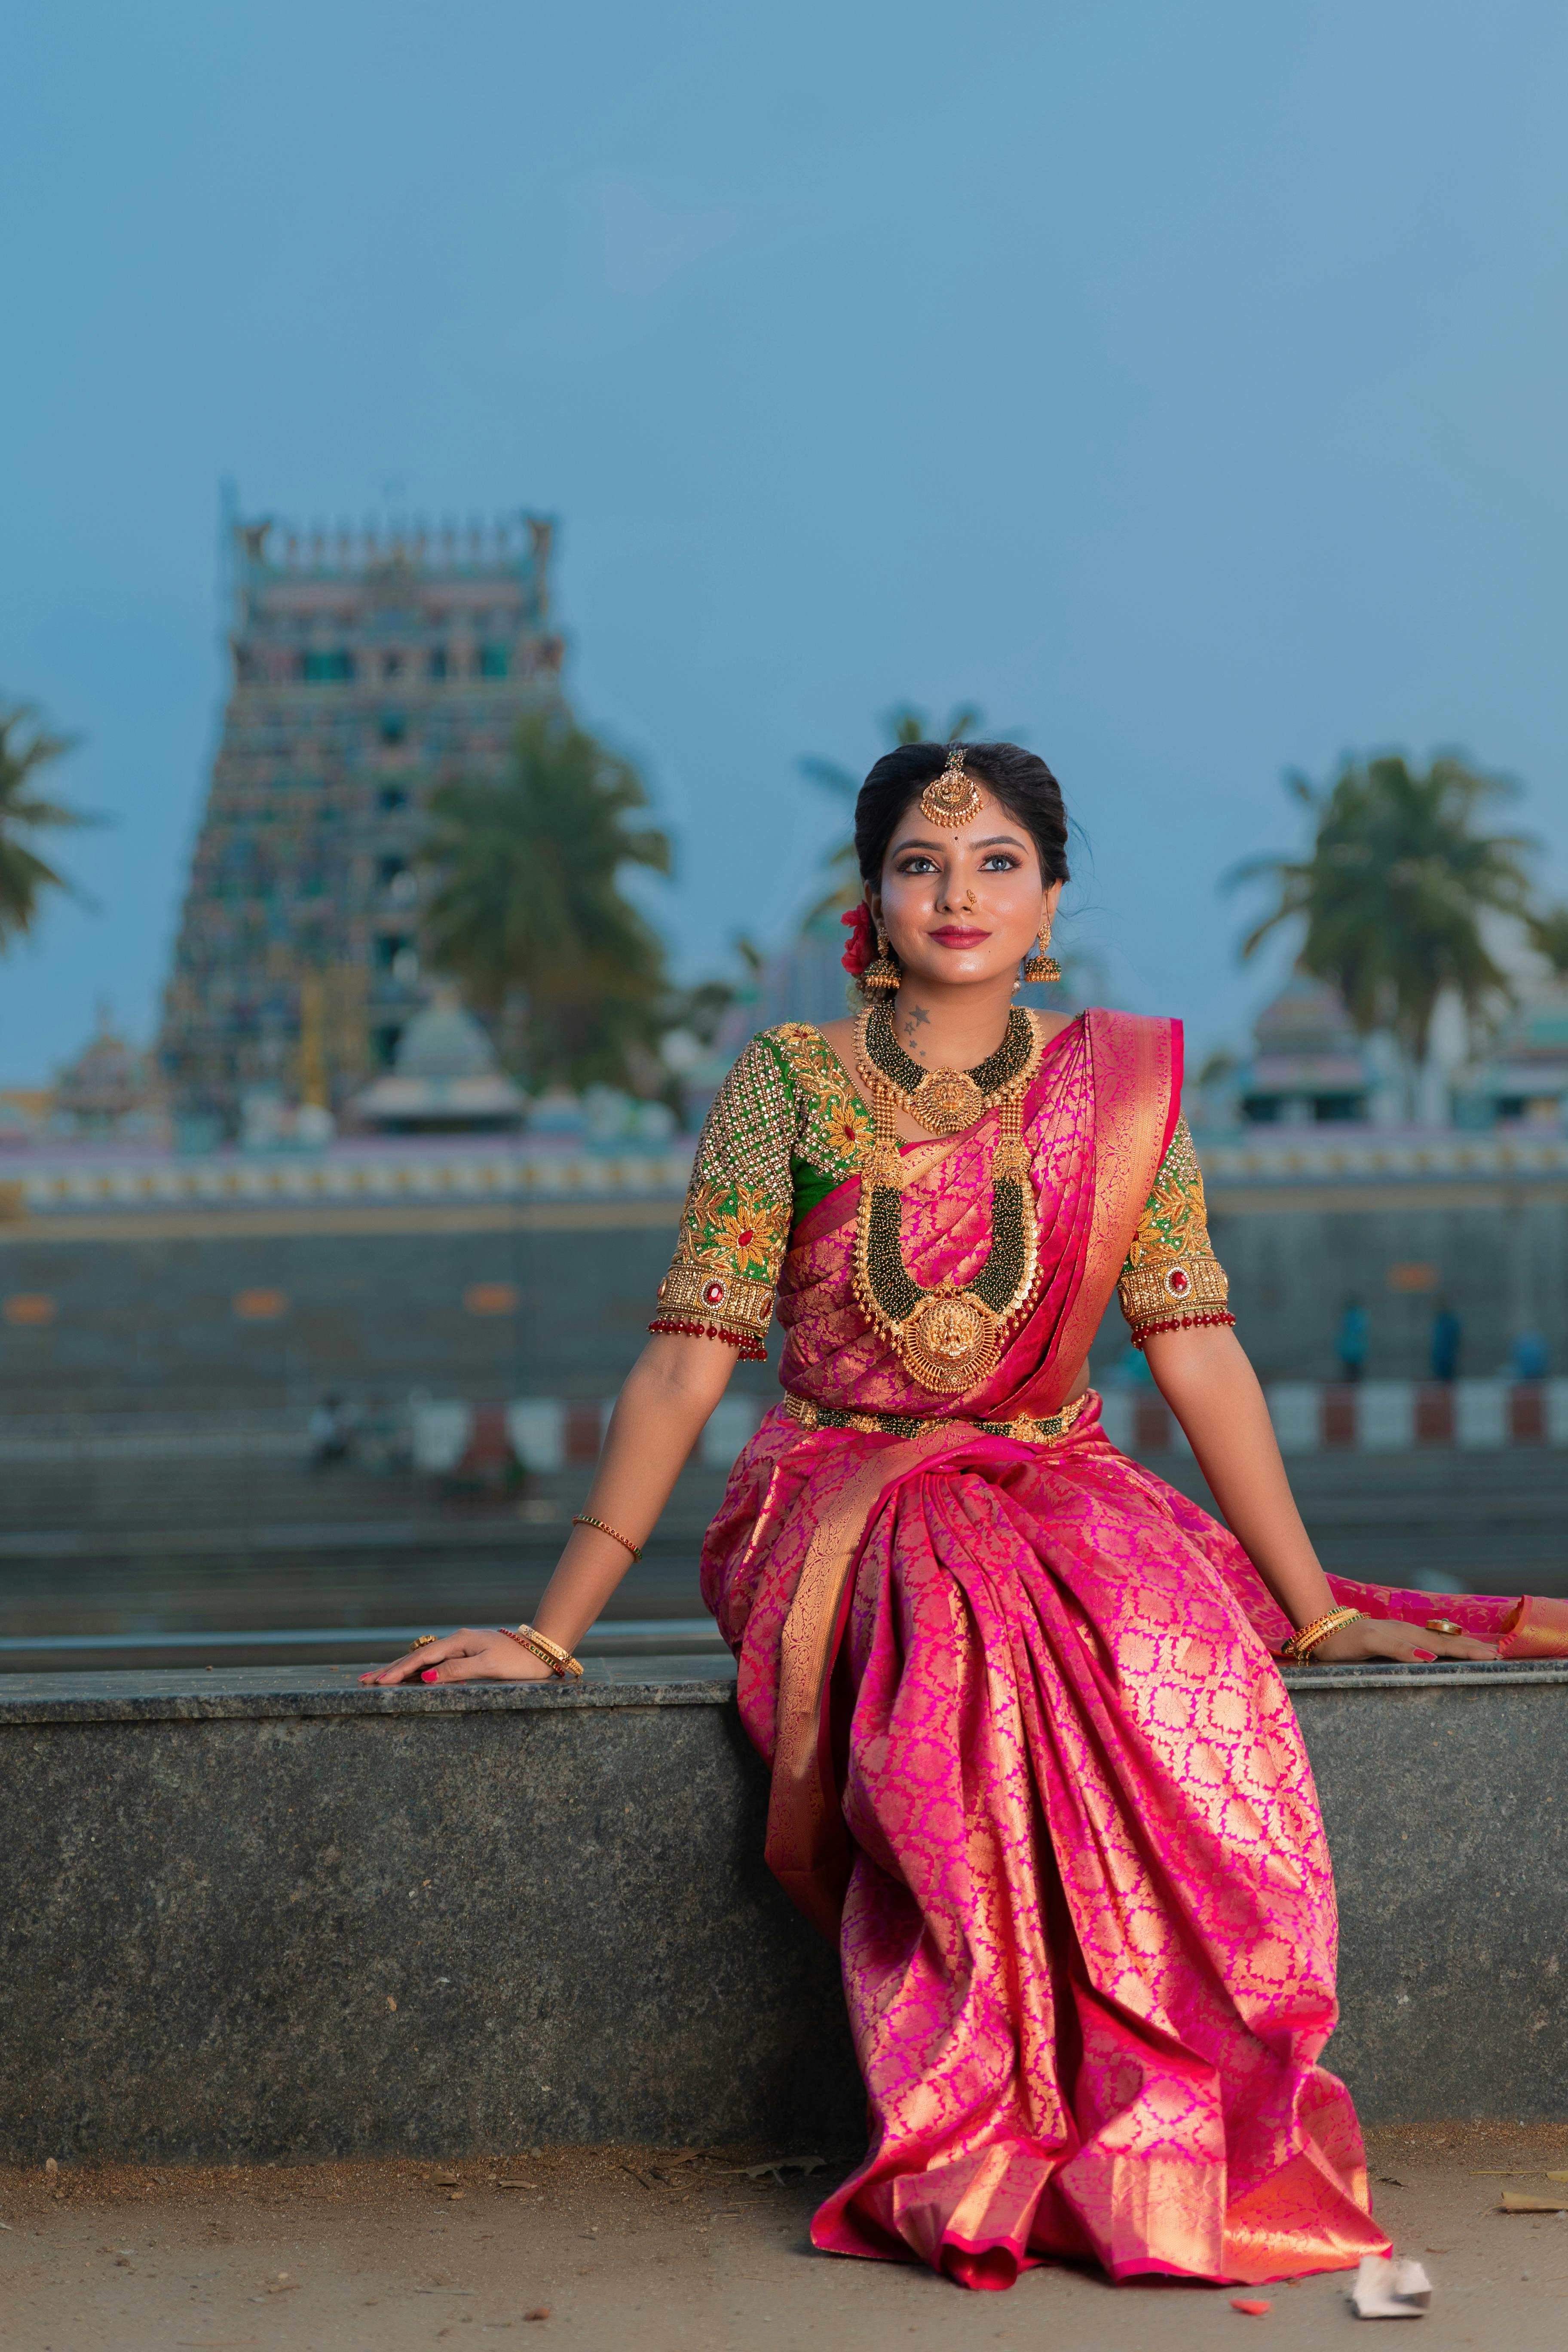 free photo of young woman in a traditional pink saree dress posing outside